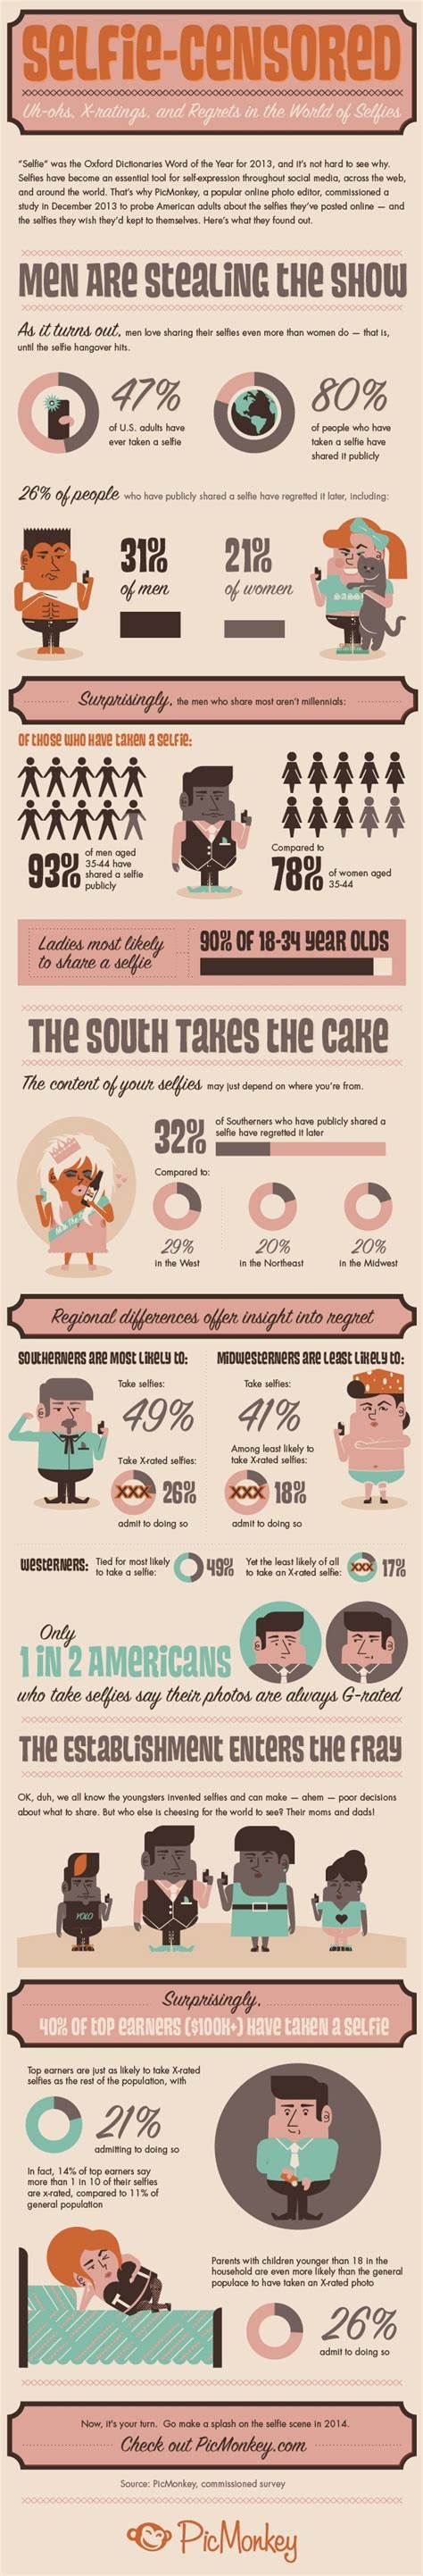 infographic who s posing now the selfie survey social media infographic social media